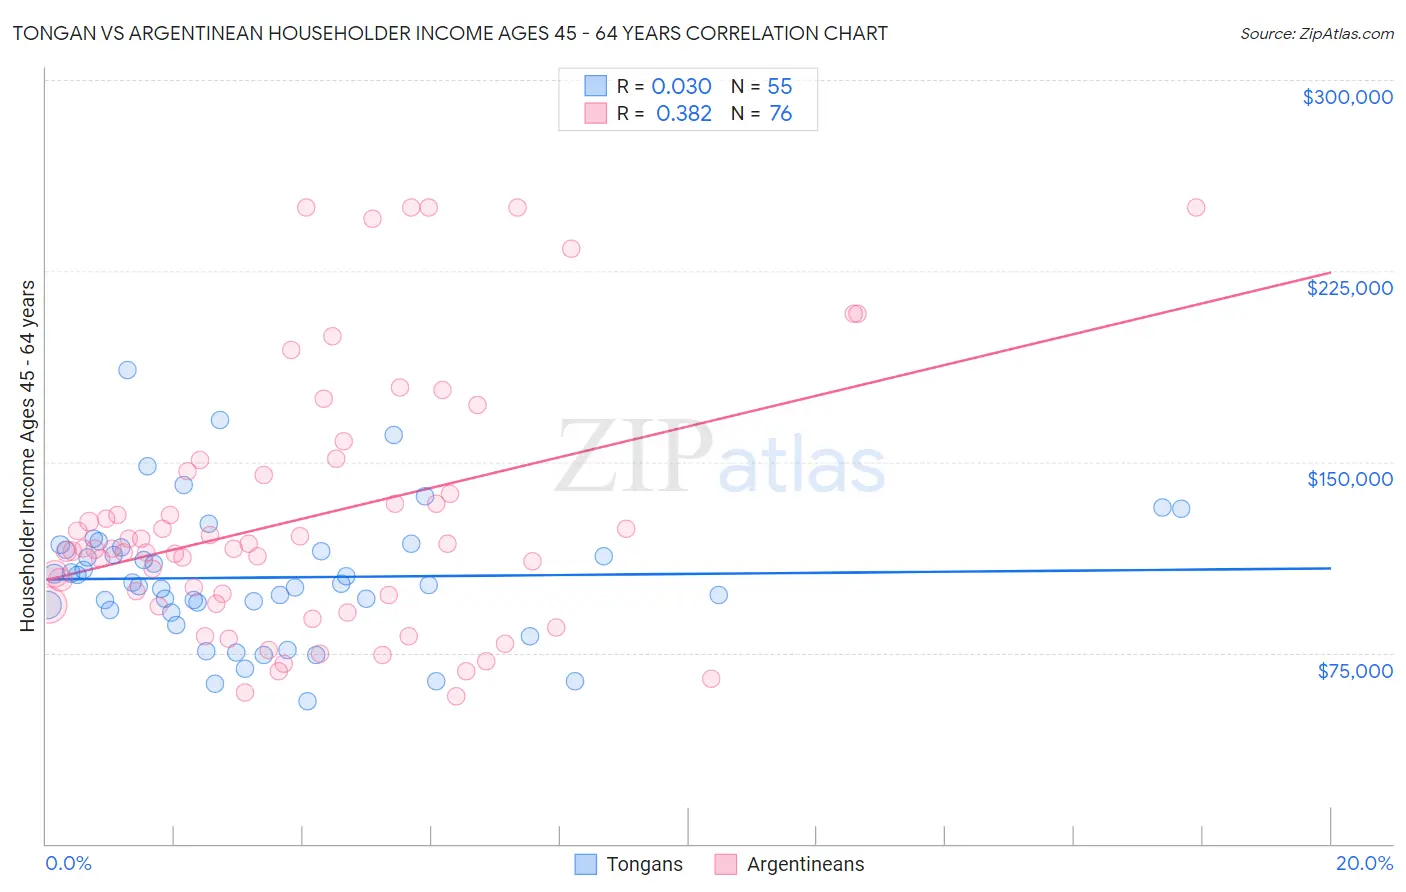 Tongan vs Argentinean Householder Income Ages 45 - 64 years